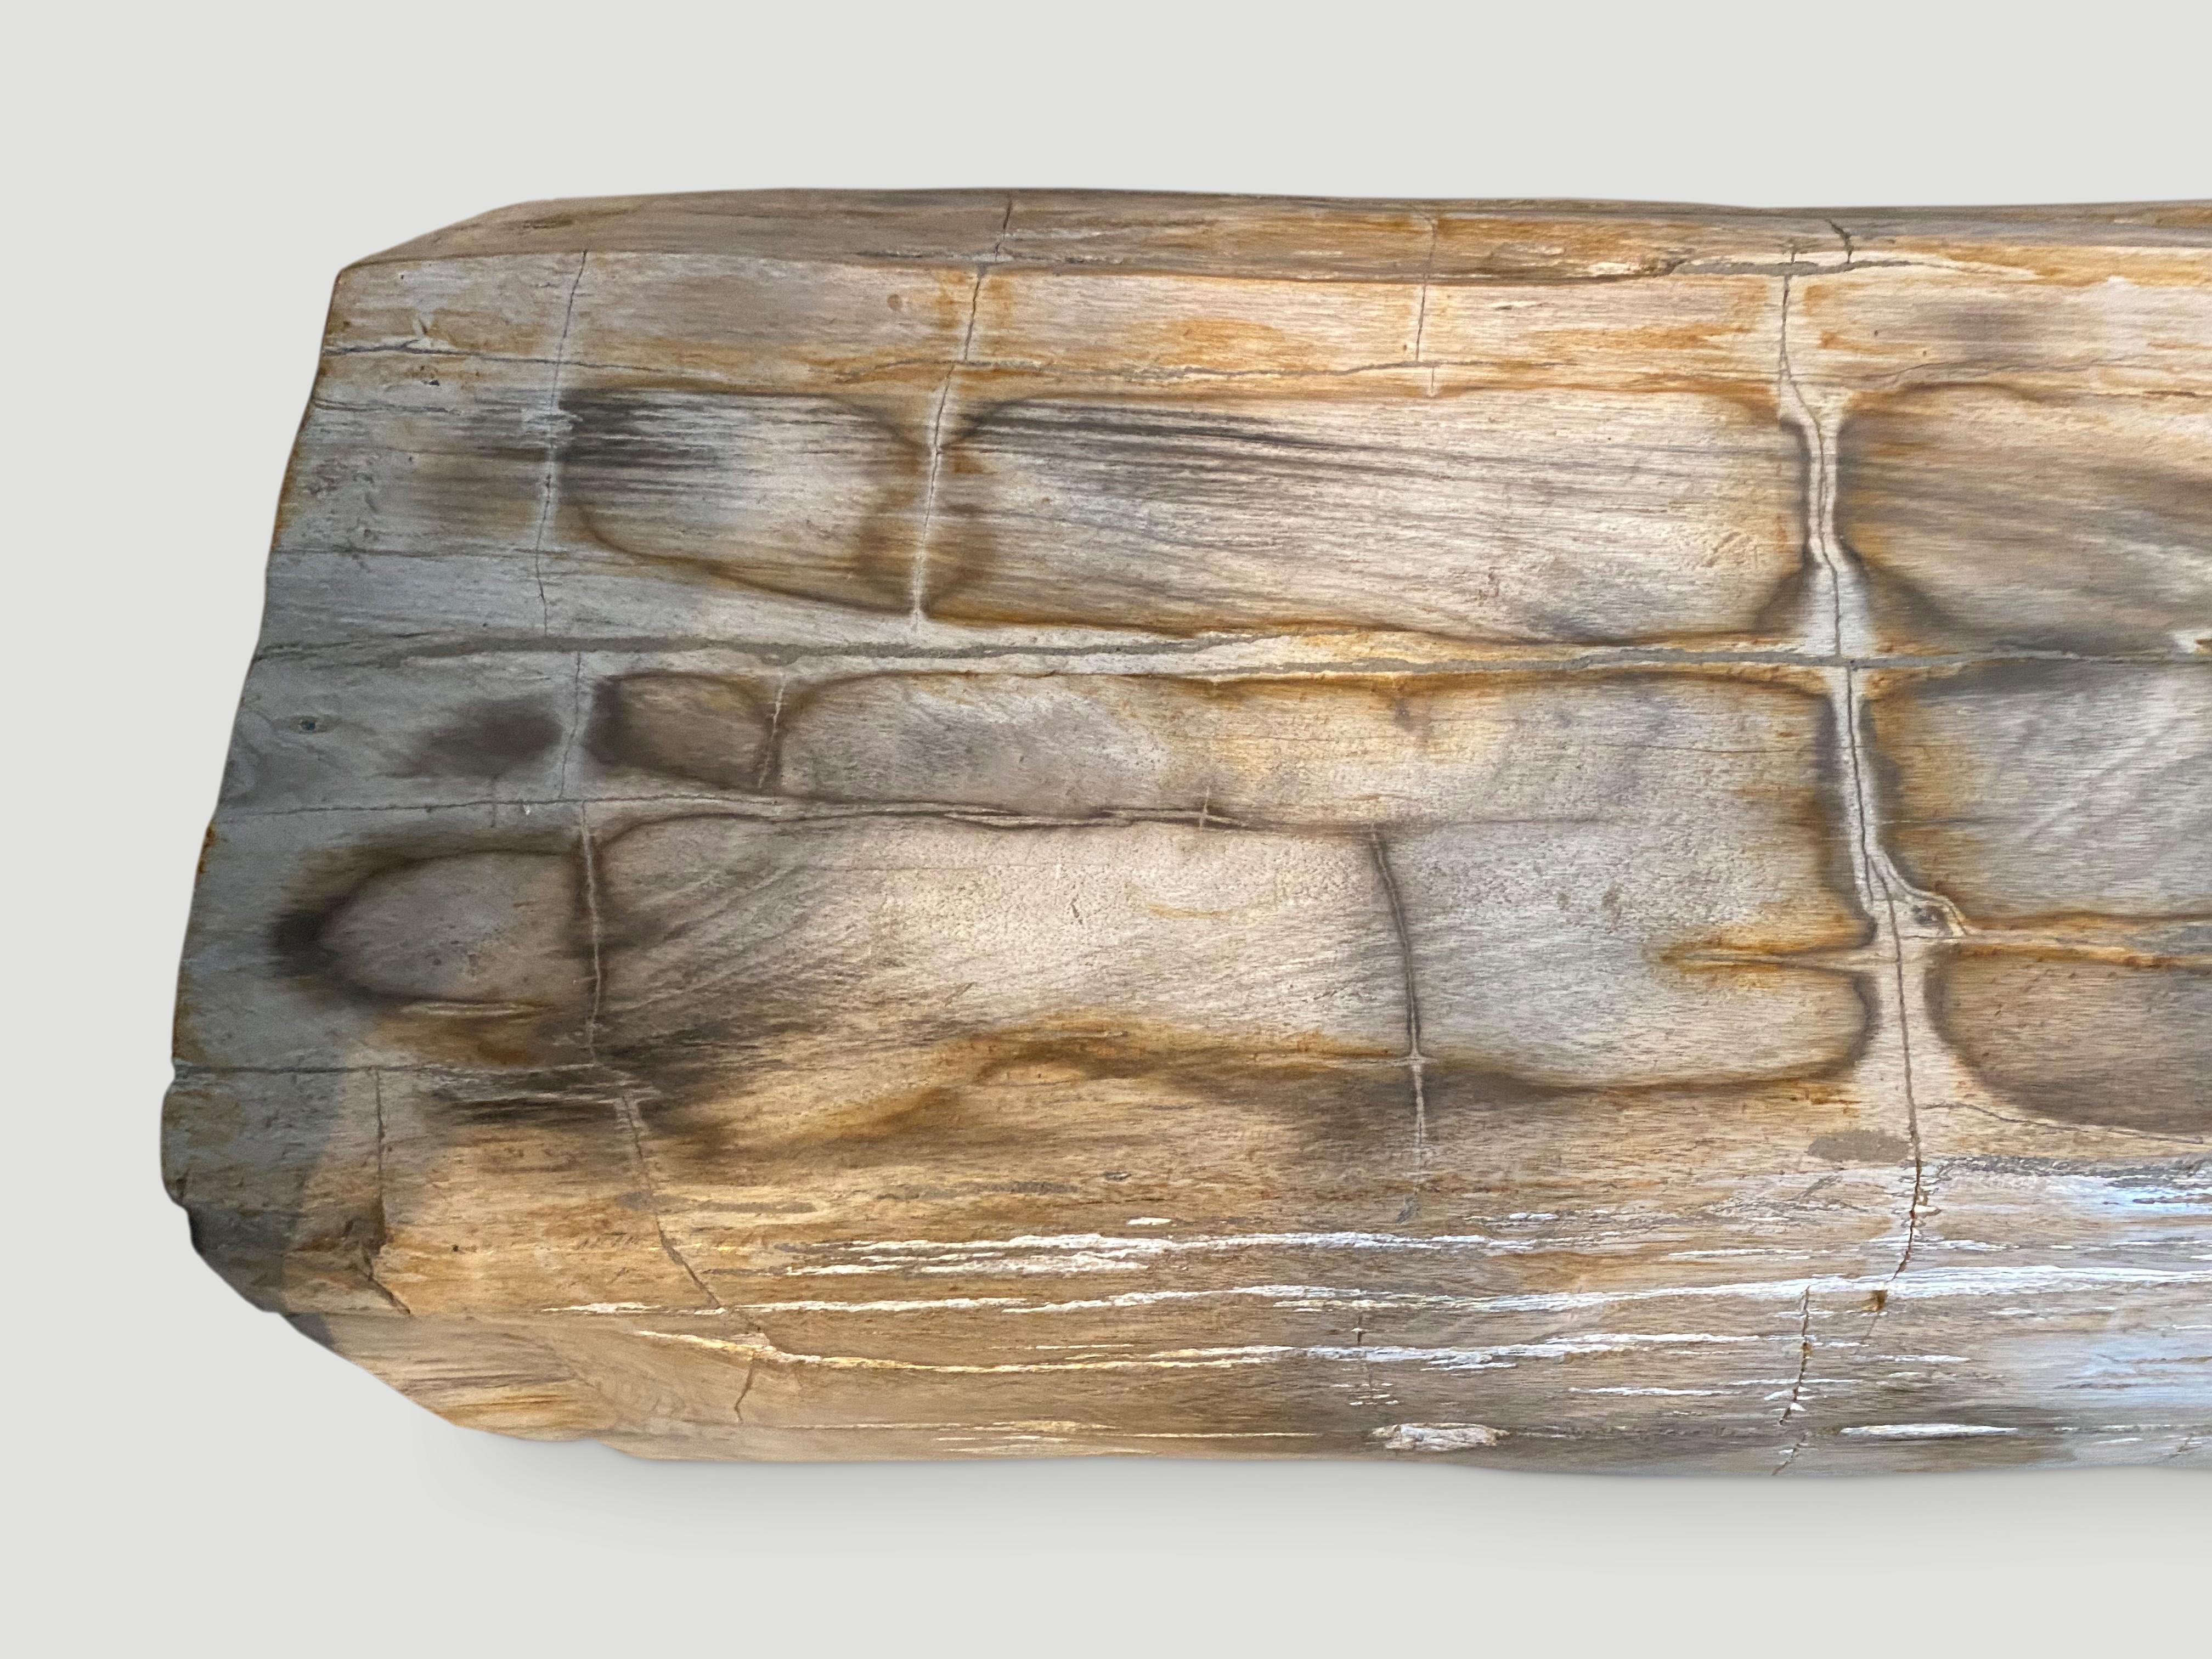 Impressive, high quality petrified wood log bench. It’s fascinating how Mother Nature produces these exquisite 40 million year old petrified teak logs with such beautiful colors and natural patterns throughout. Modern yet with so much history.